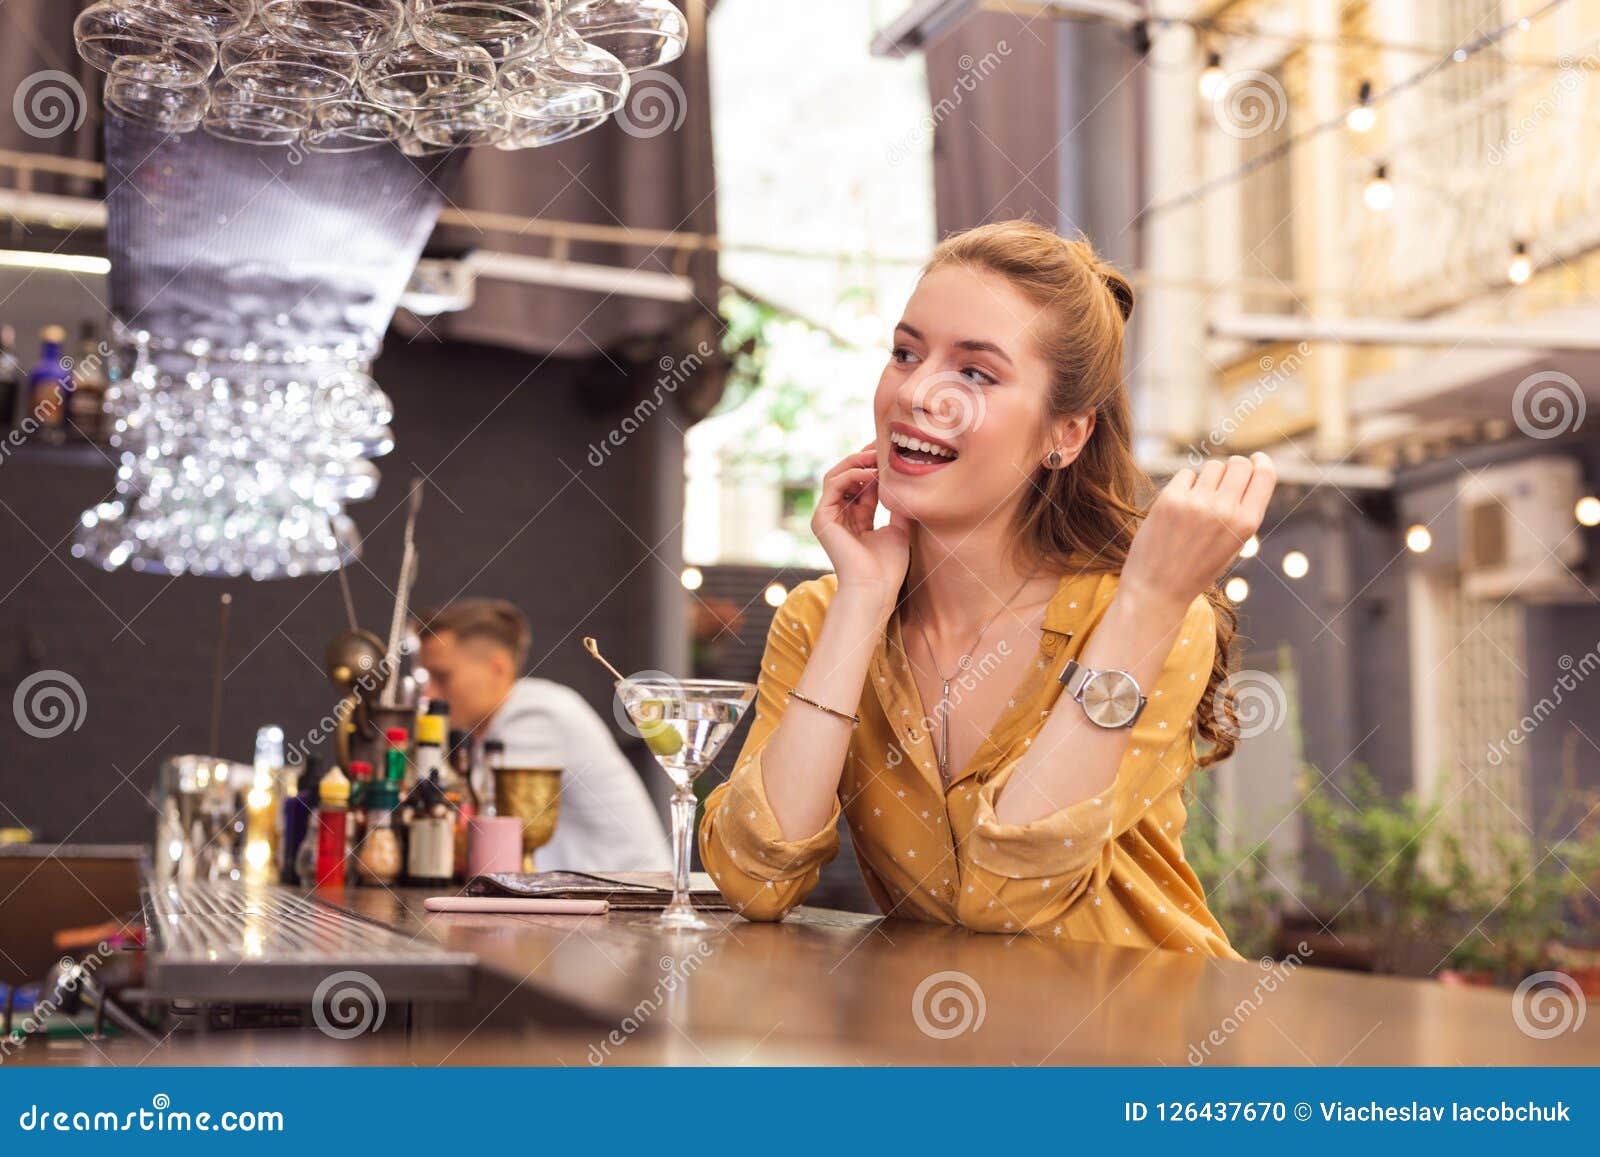 Expressive Young Girl Sitting at the Bar Counter and Looking Happy ...